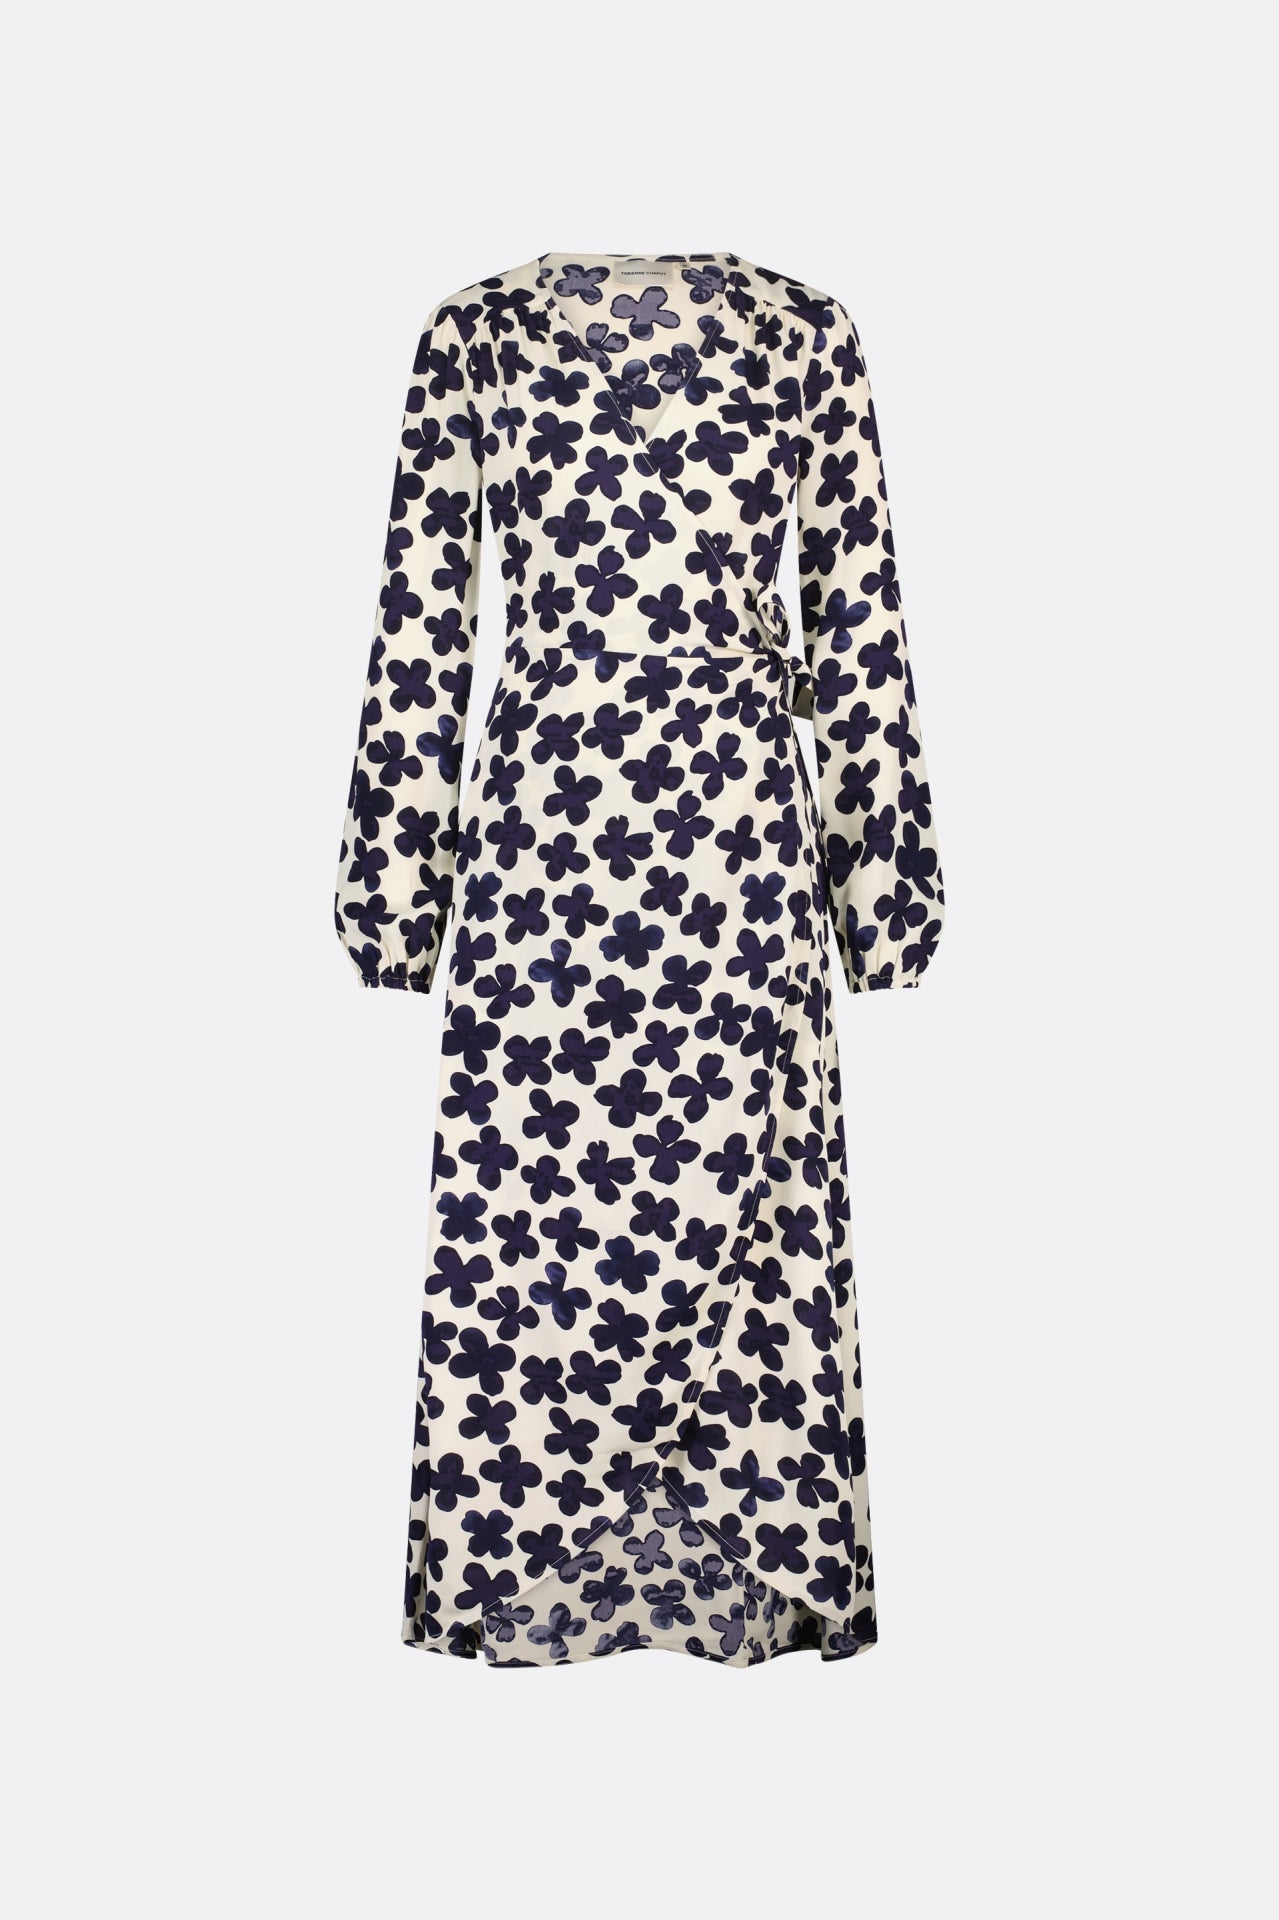 Long sleeve wrap dress in cream with a navy floral print